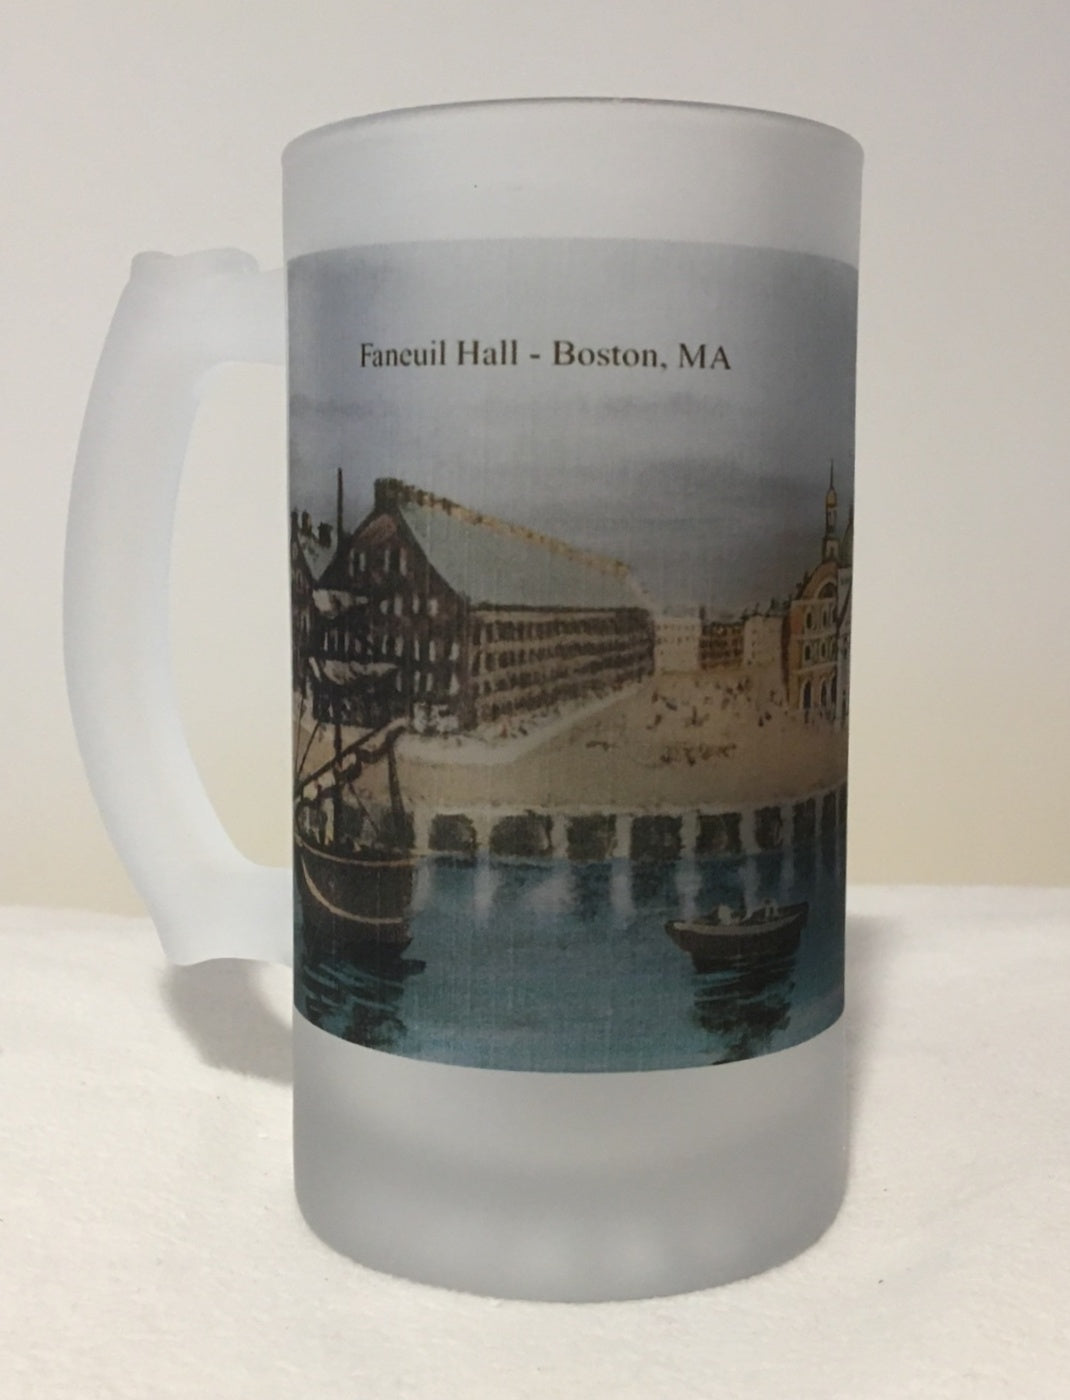 Colorful Frosted Glass Mug of Boston's Historic Faneuil Hall - That Fabled Shore Home Decor